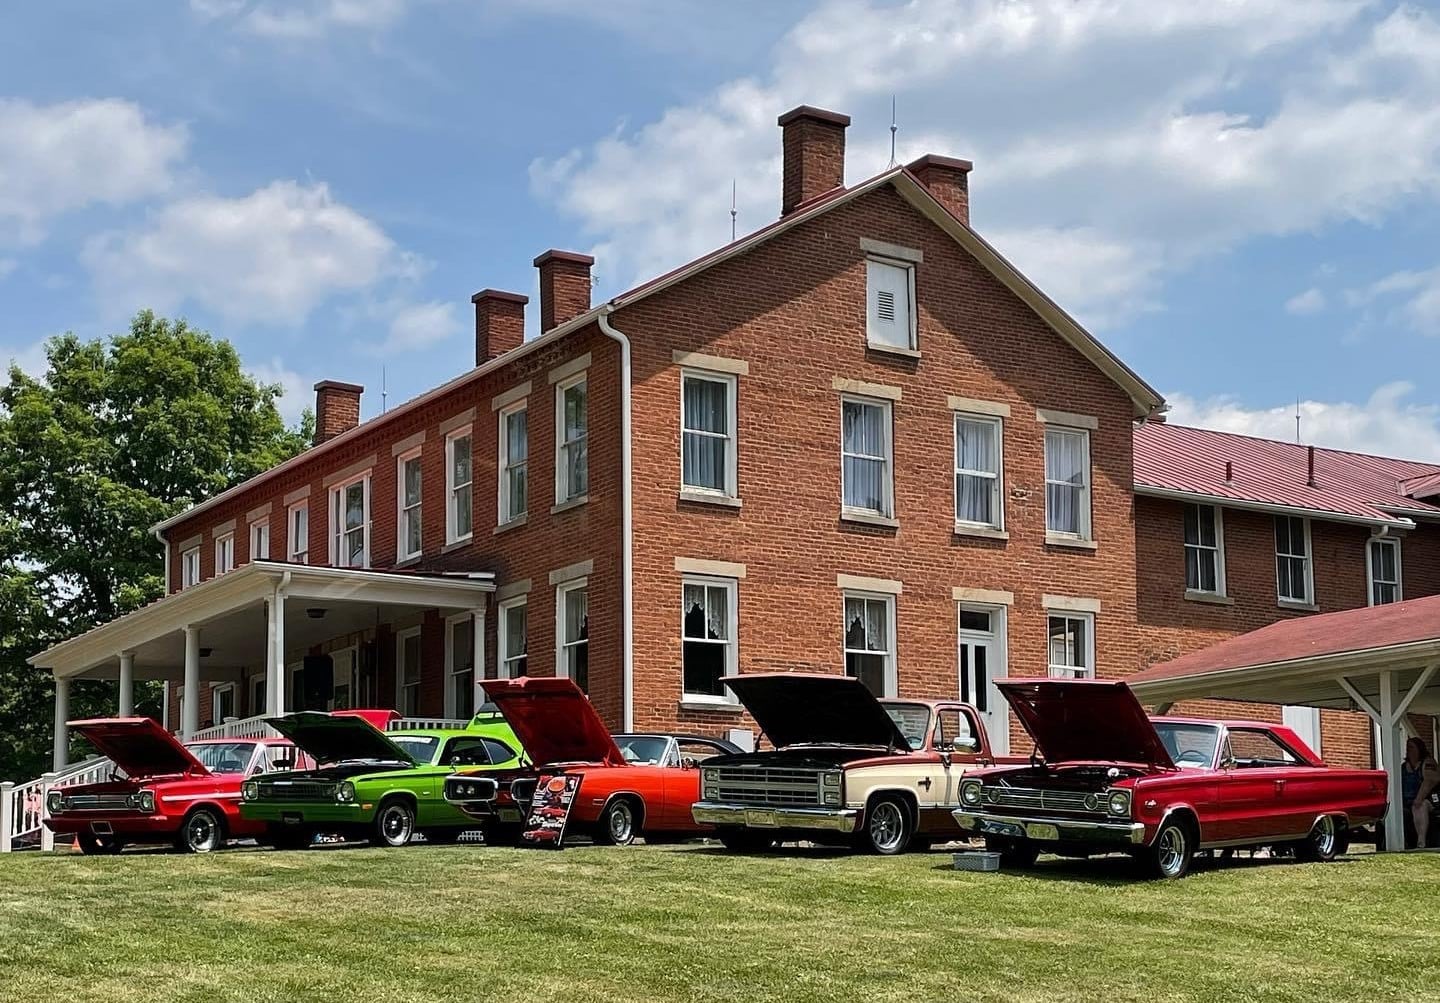 Photograph of car show in front of the Greene County Historical Society Museum.